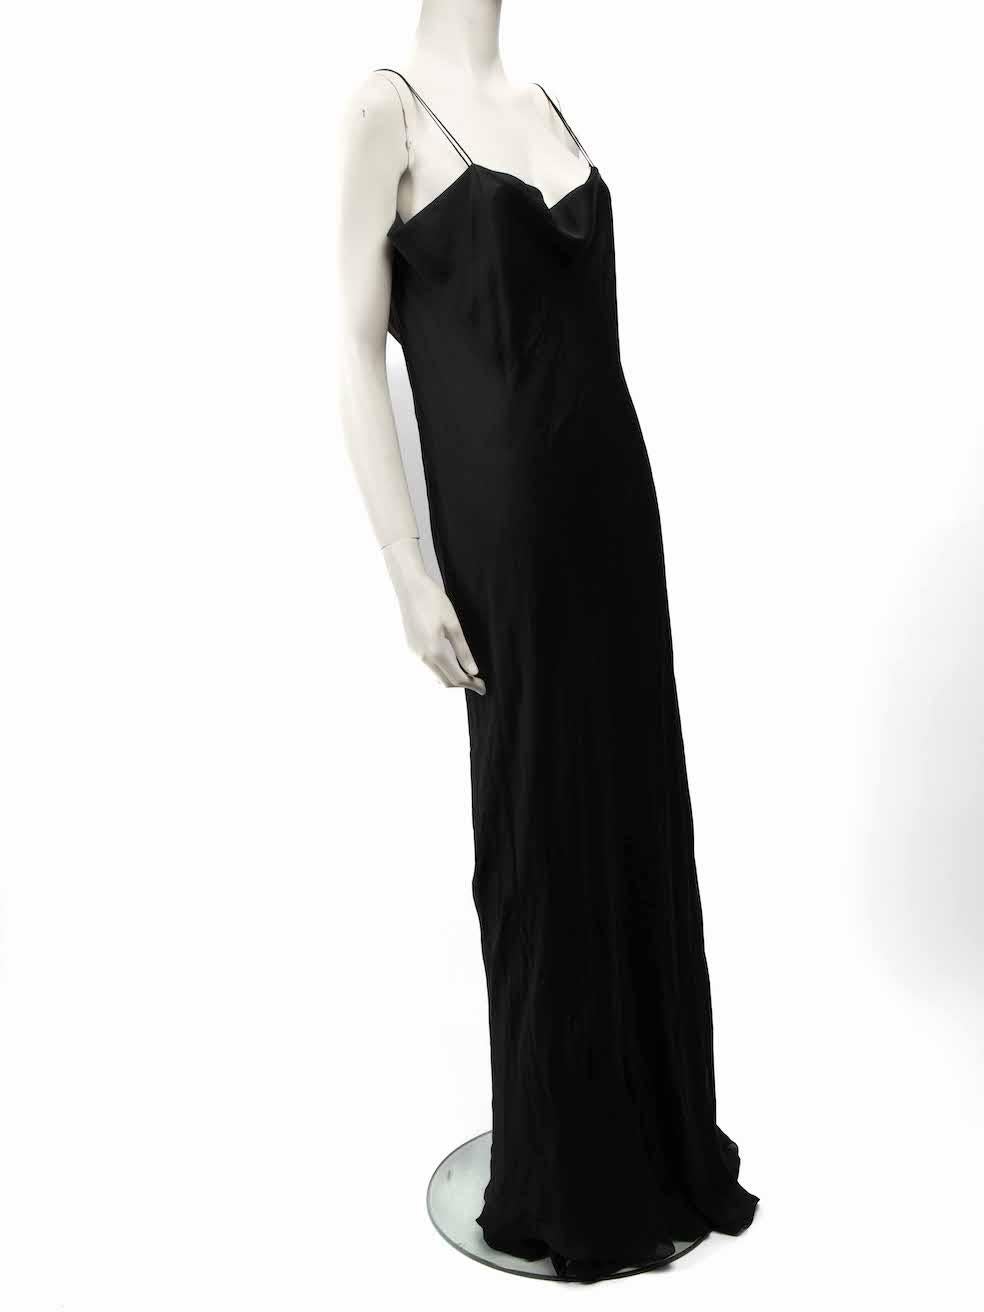 CONDITION is Very good. Minimal wear to dress is evident. Minimal wear to the hem and hem lining with small plucks to the weave on this used The Row designer resale item.
 
 
 
 Details
 
 
 Black
 
 Silk
 
 Slip dress
 
 Maxi
 
 Sleeveless
 
 Cowl